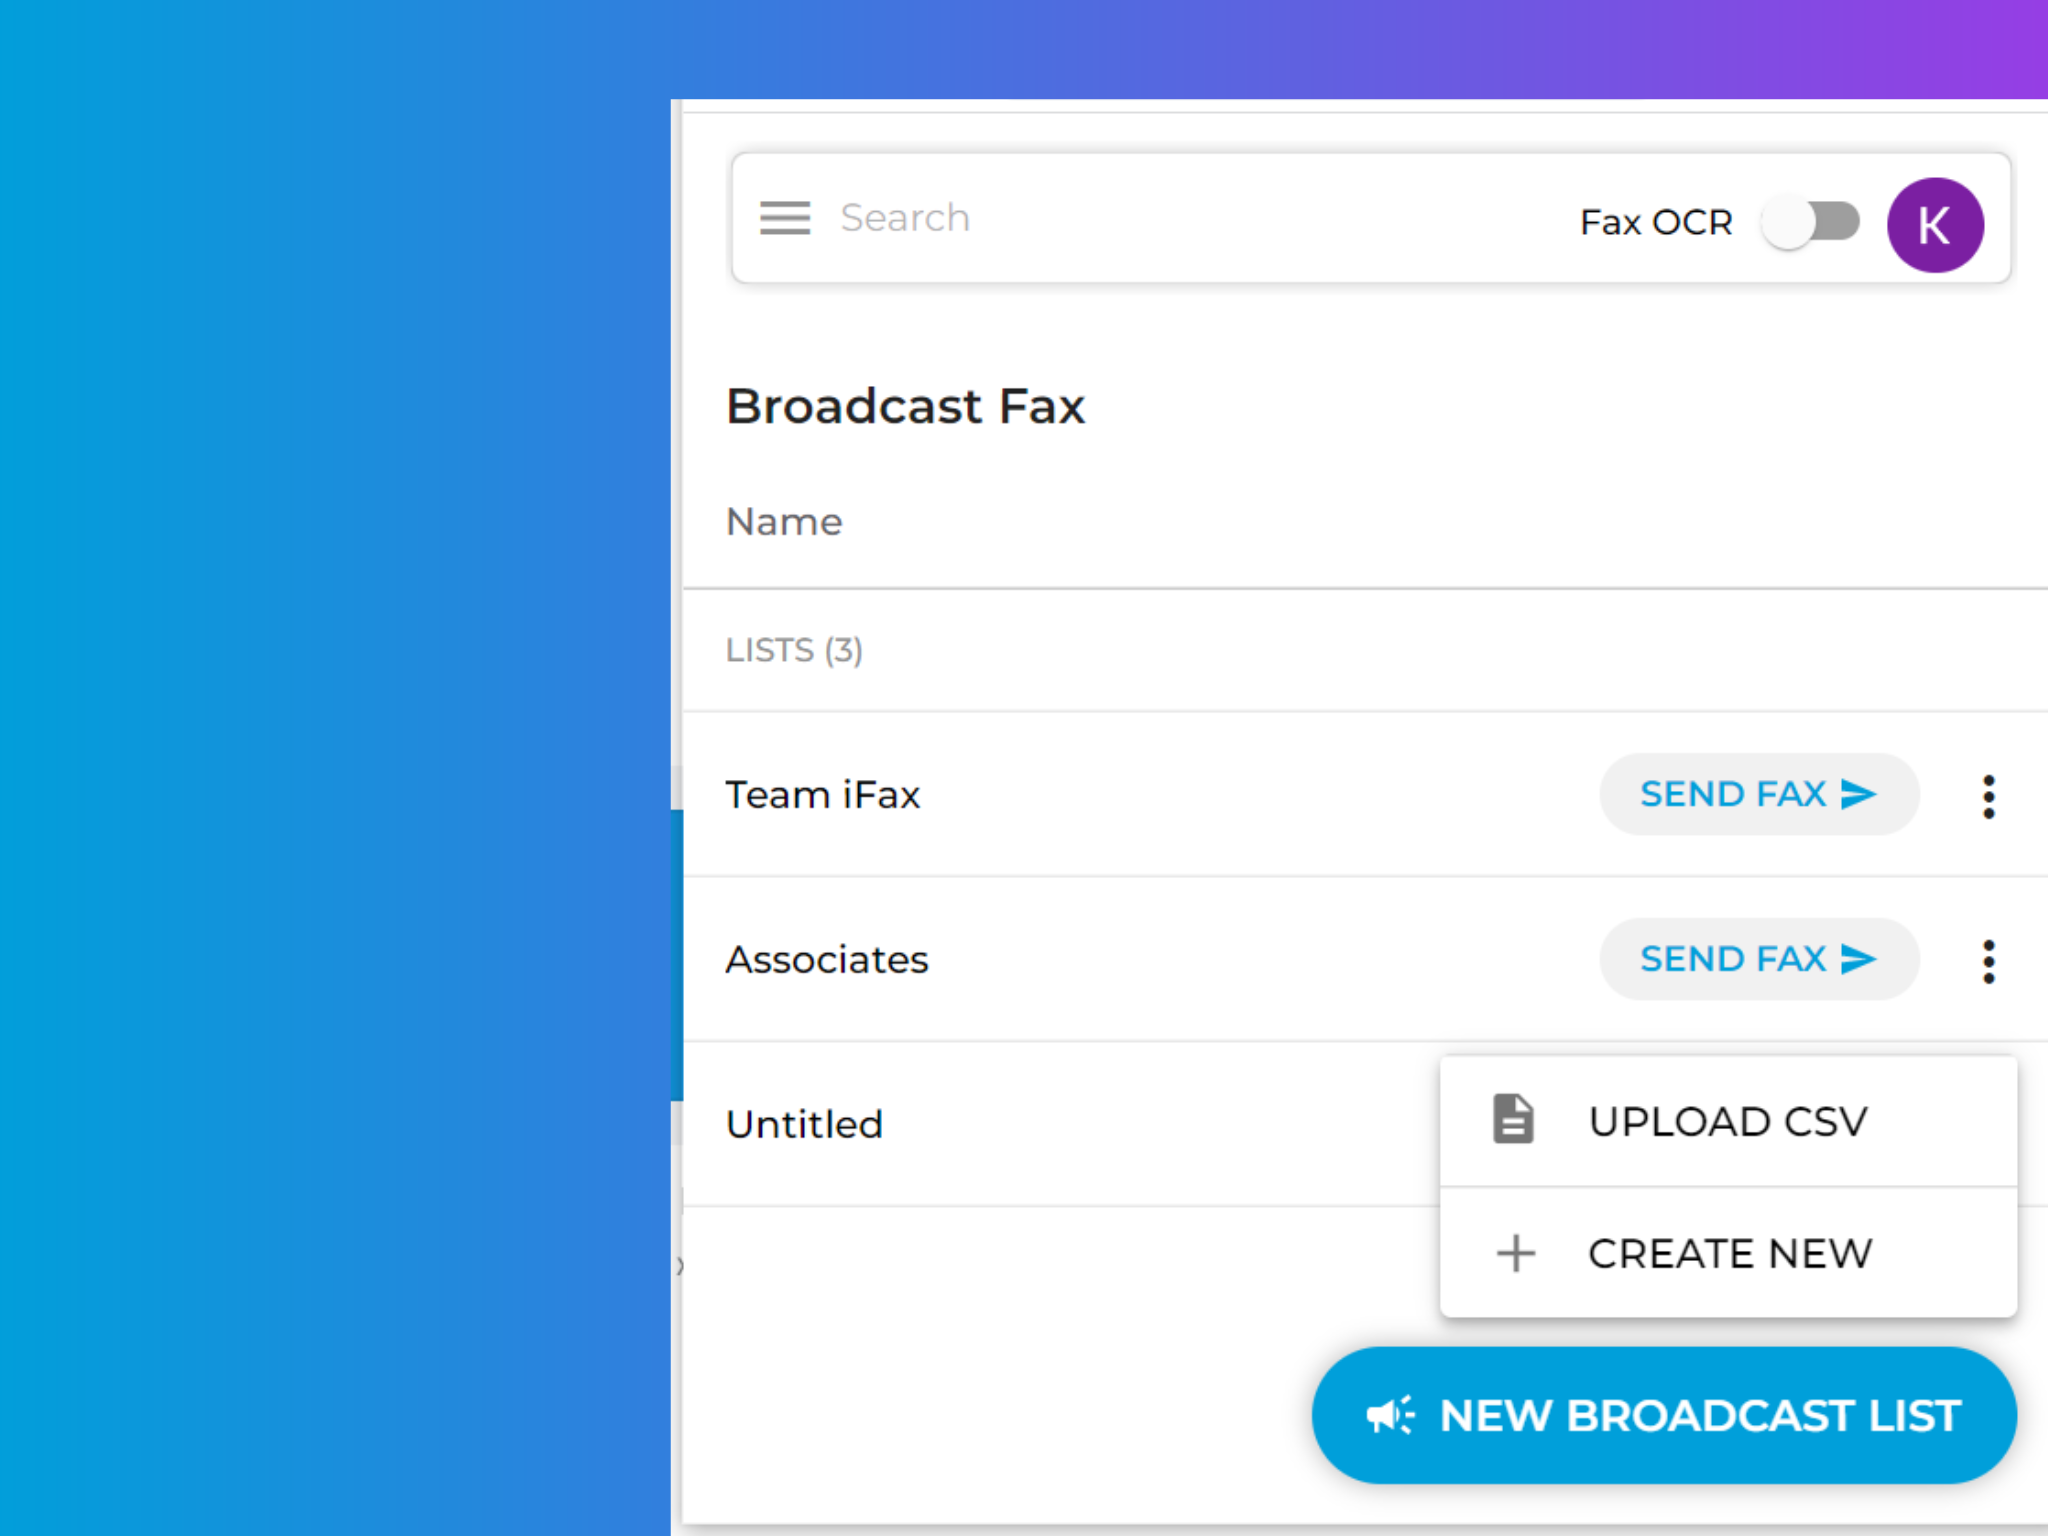 Contacts Upload: Broadcast List Management Made Easy